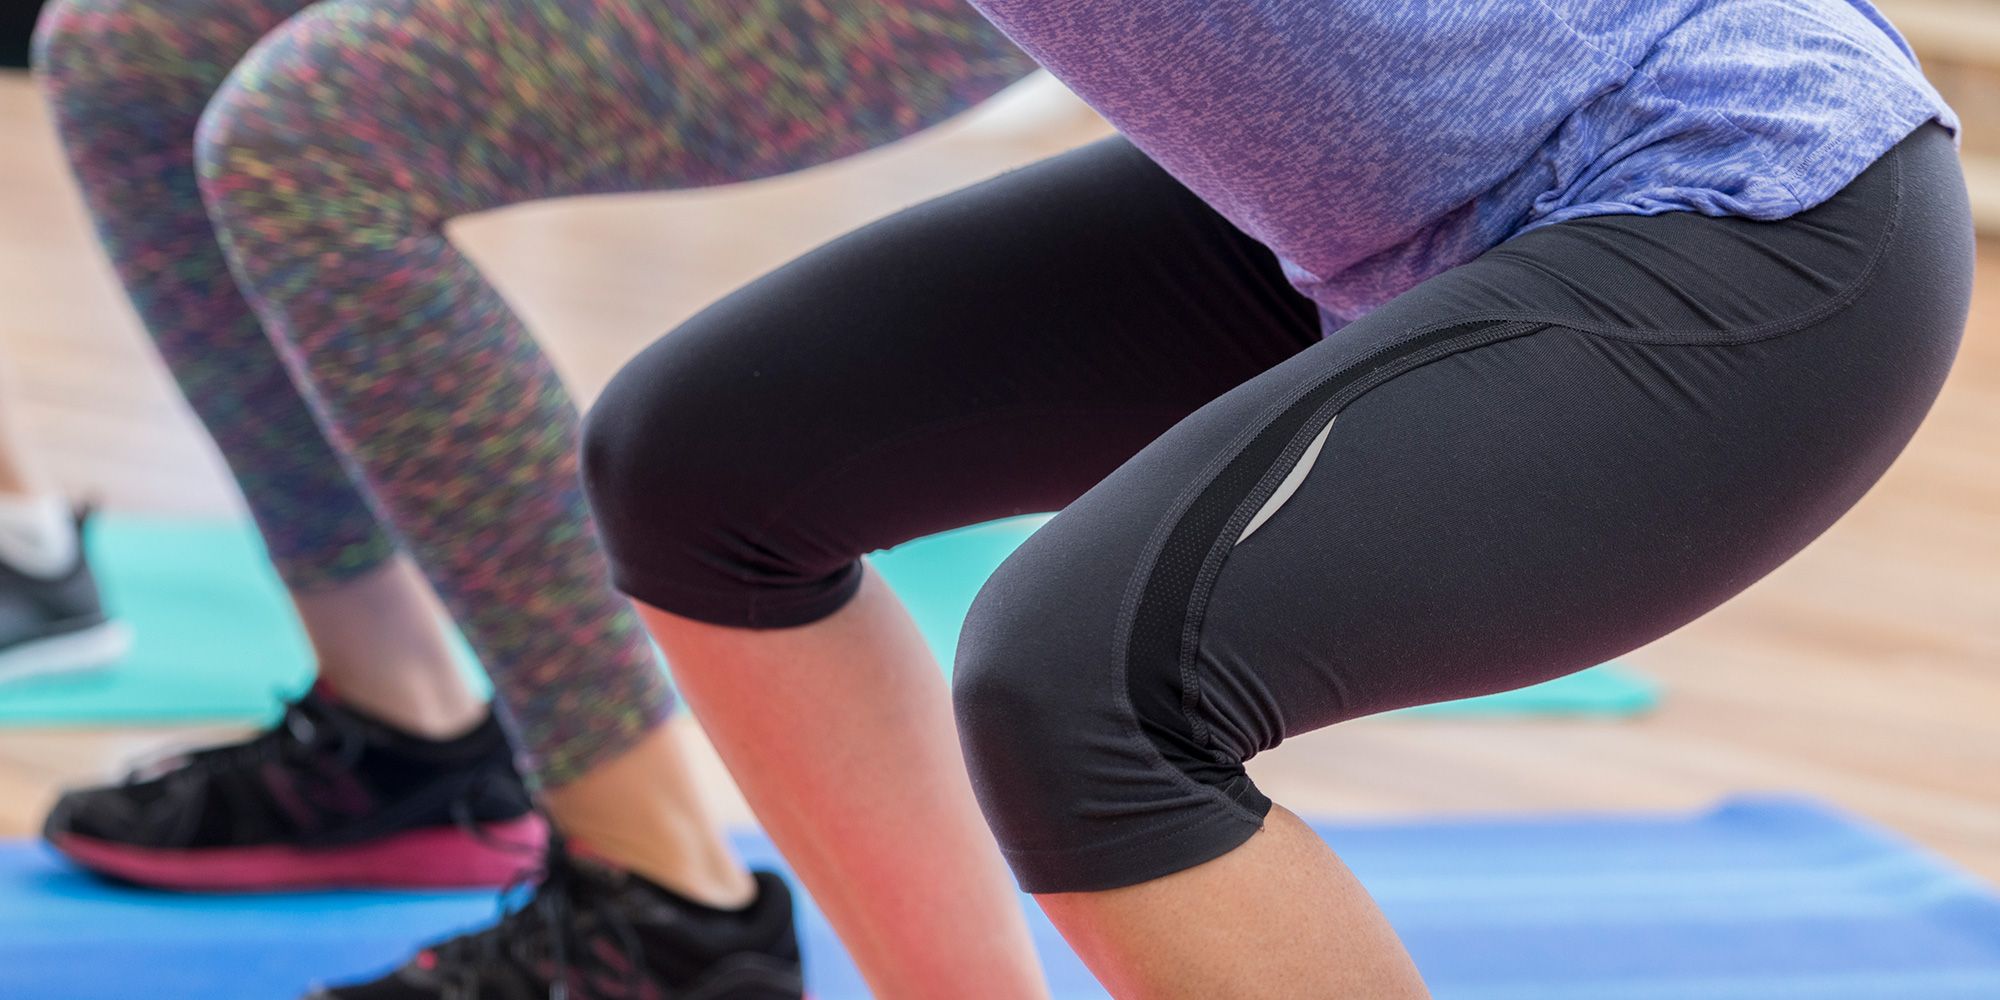 Does Spandex make you sweat?